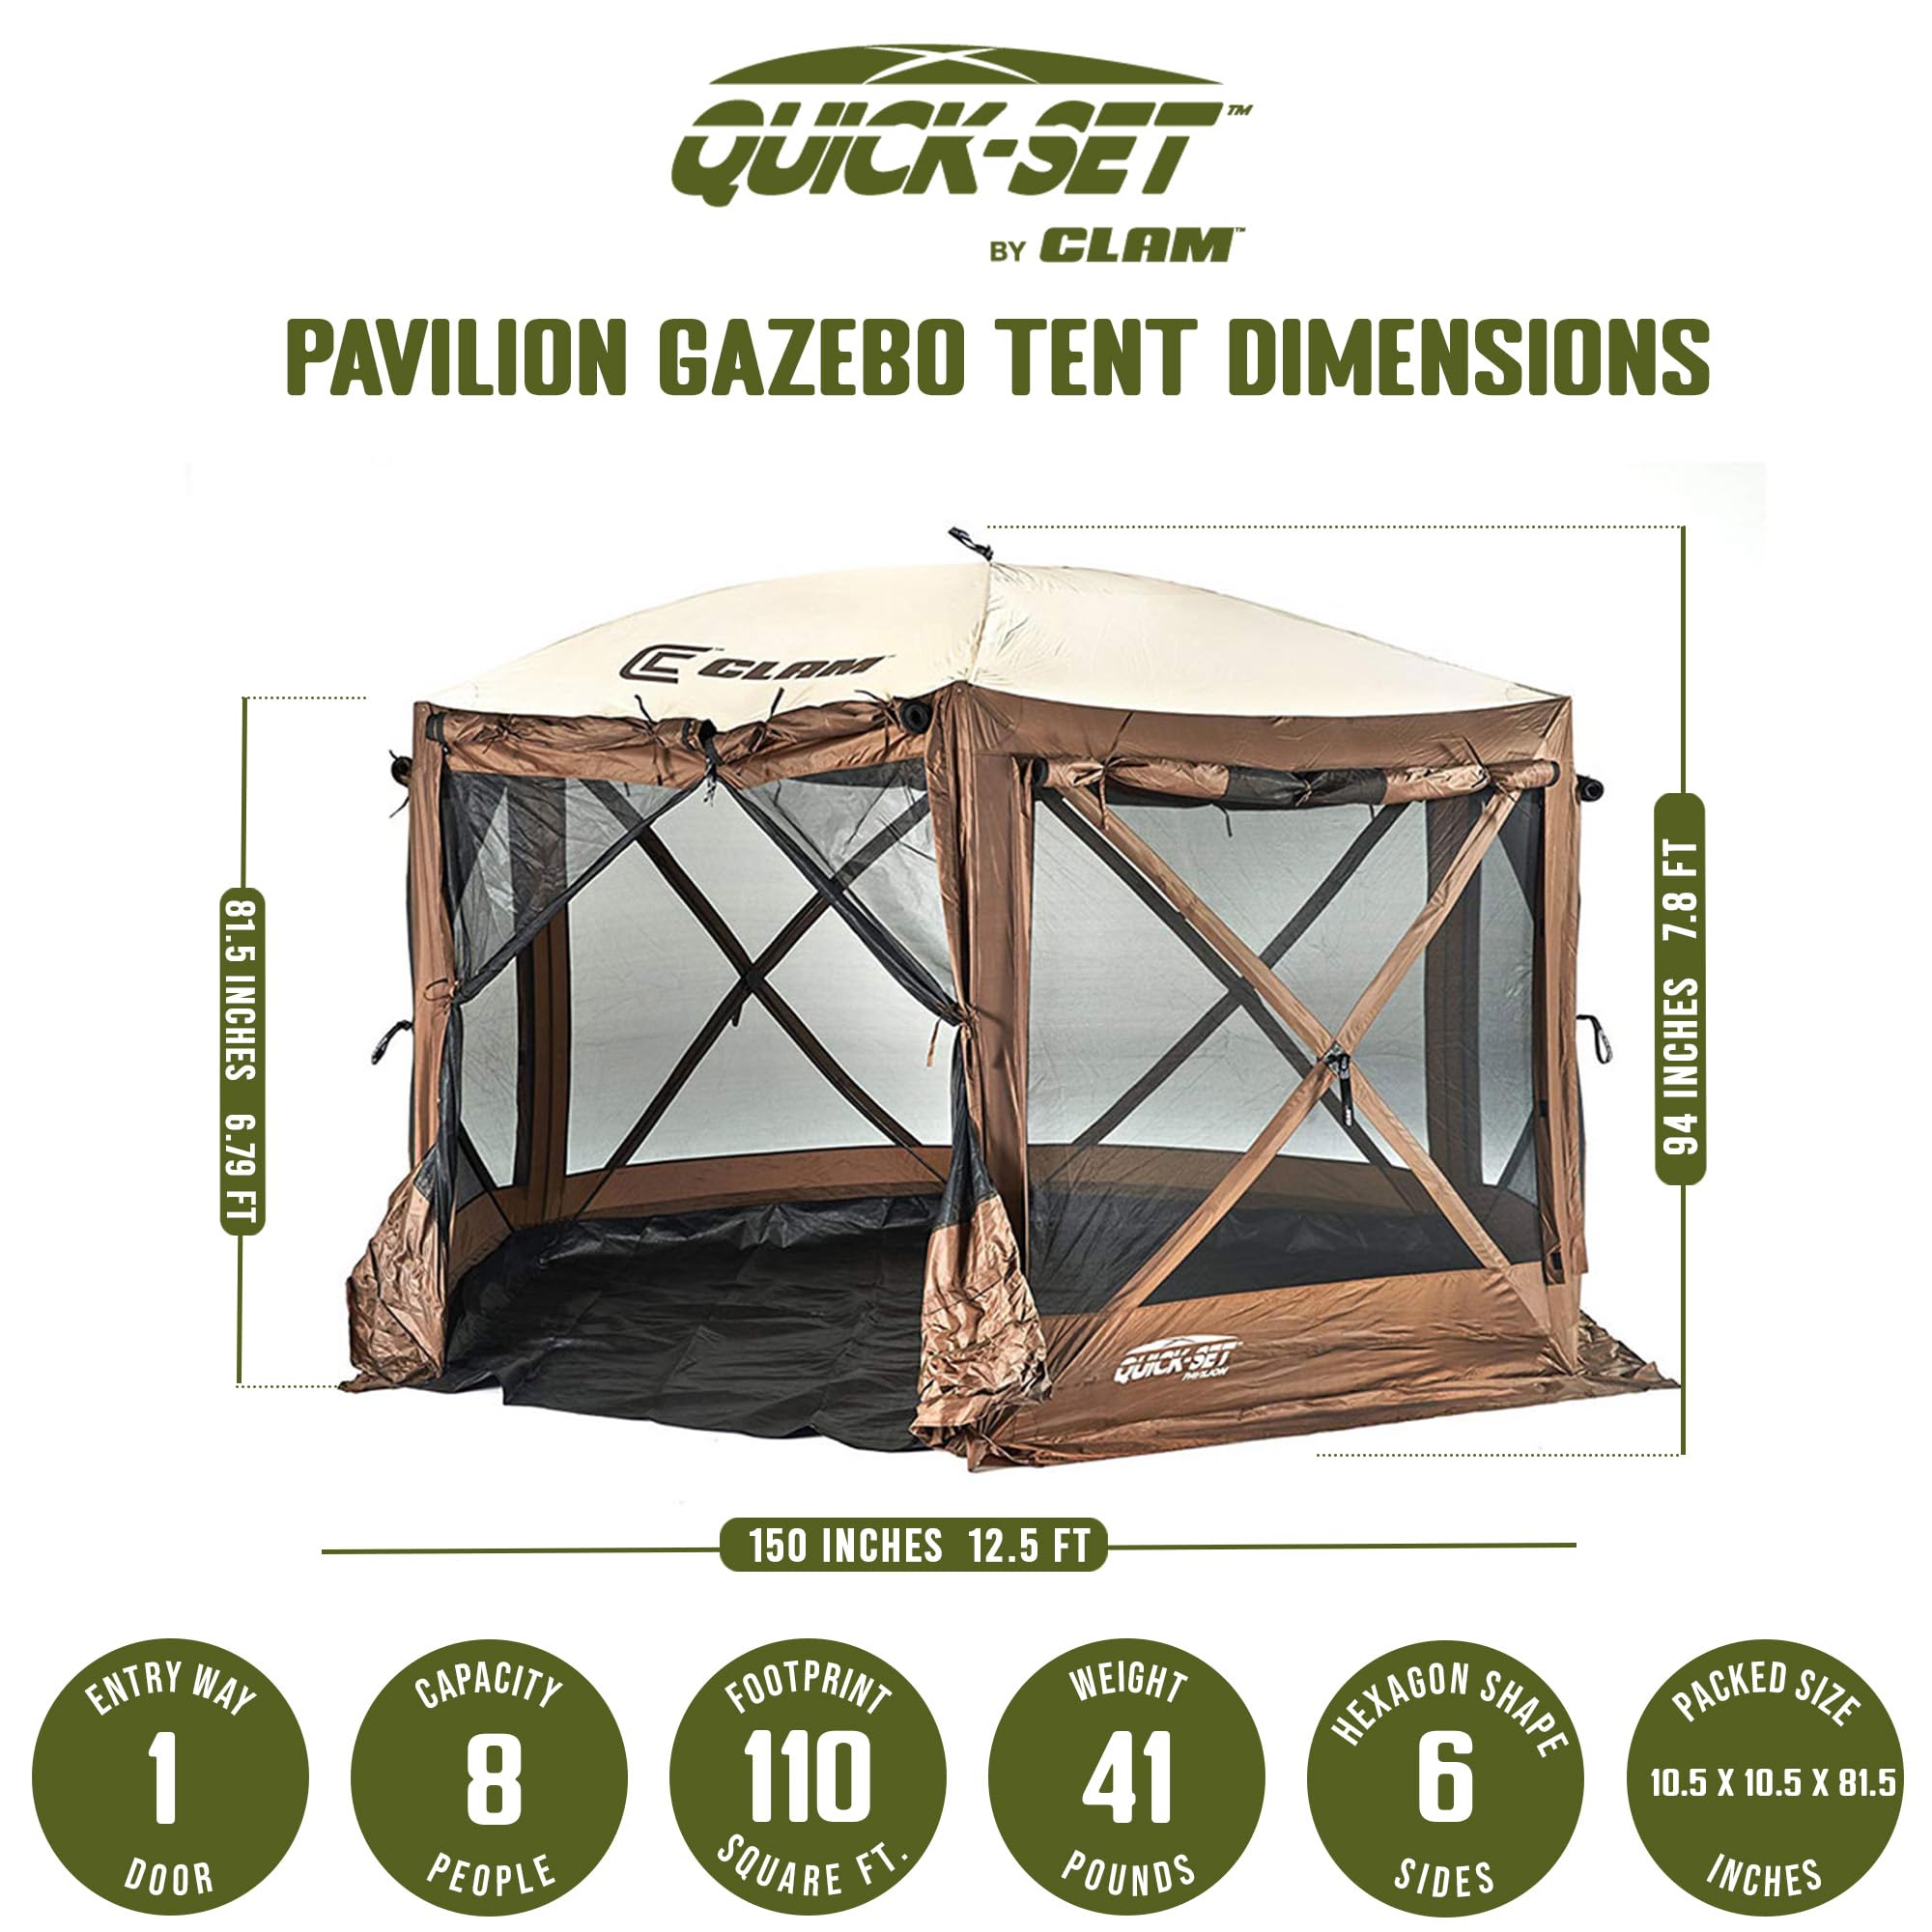 CLAM Quick Set Pavilion 12.5 x 12.5 Foot Portable Pop Up Outdoor Camping Gazebo Screen Tent Canopy Shelter and Carry Bag with Tarp Cover, Brown